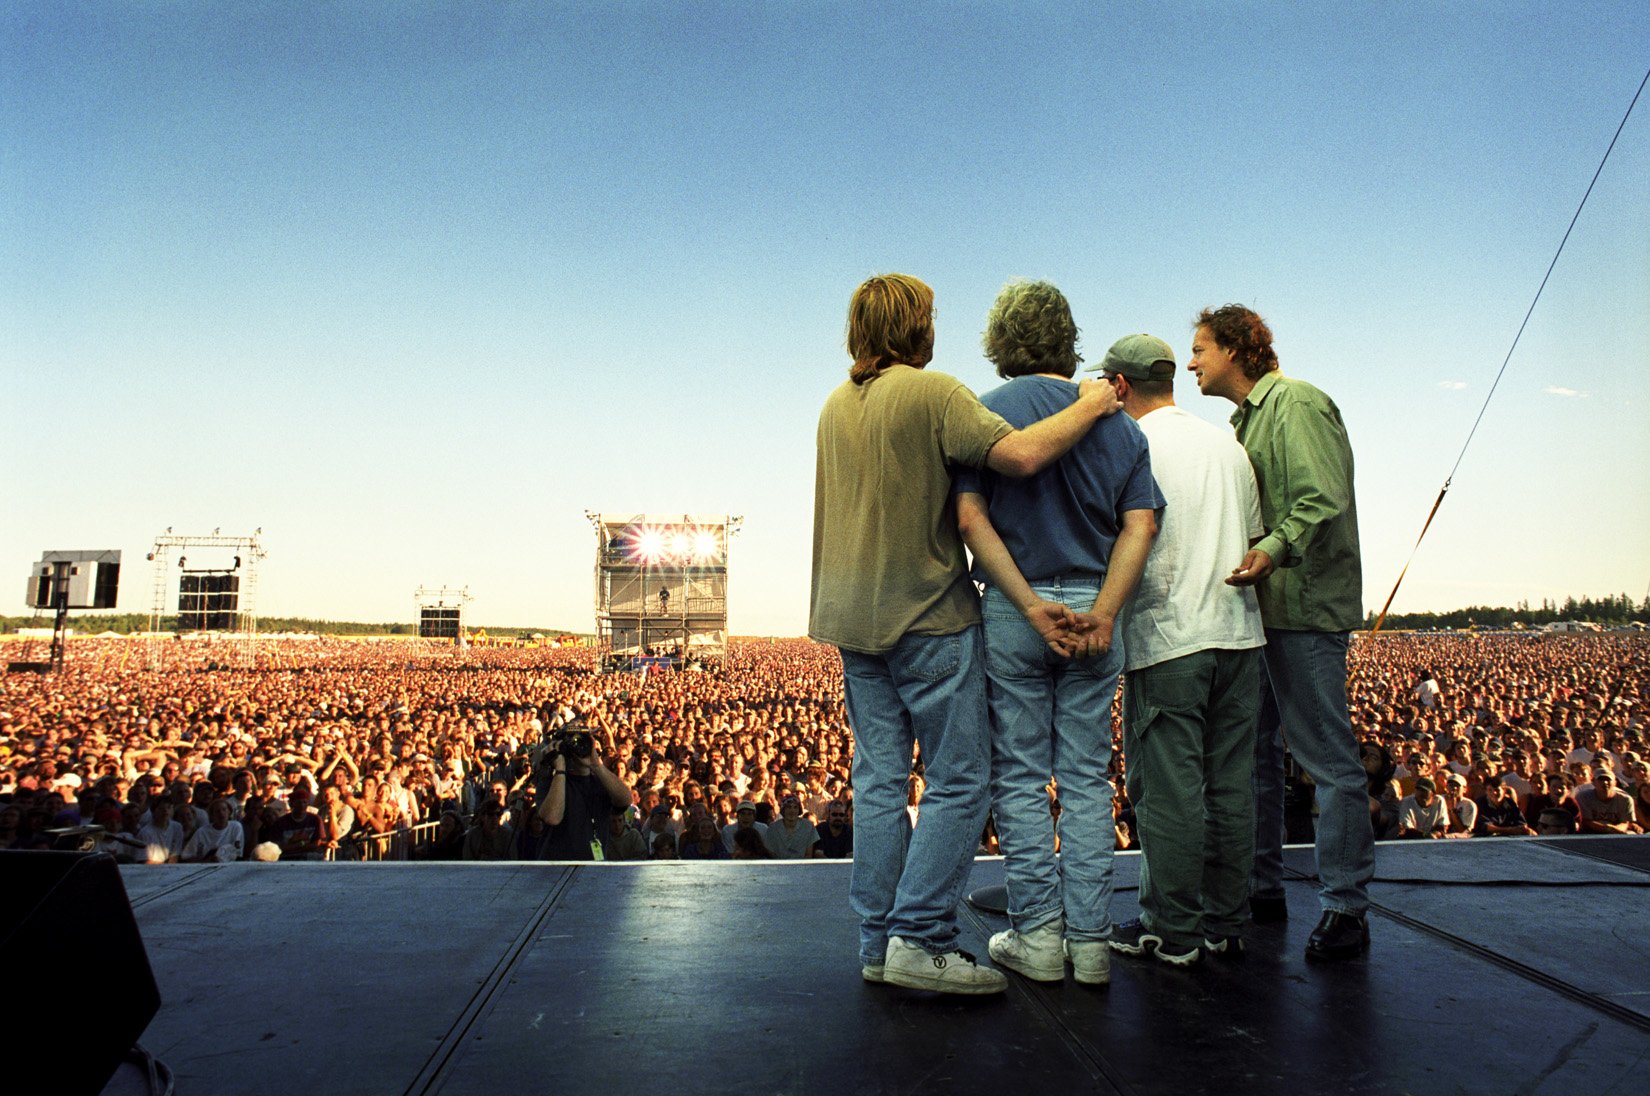 © Phish, by: Danny Clinch